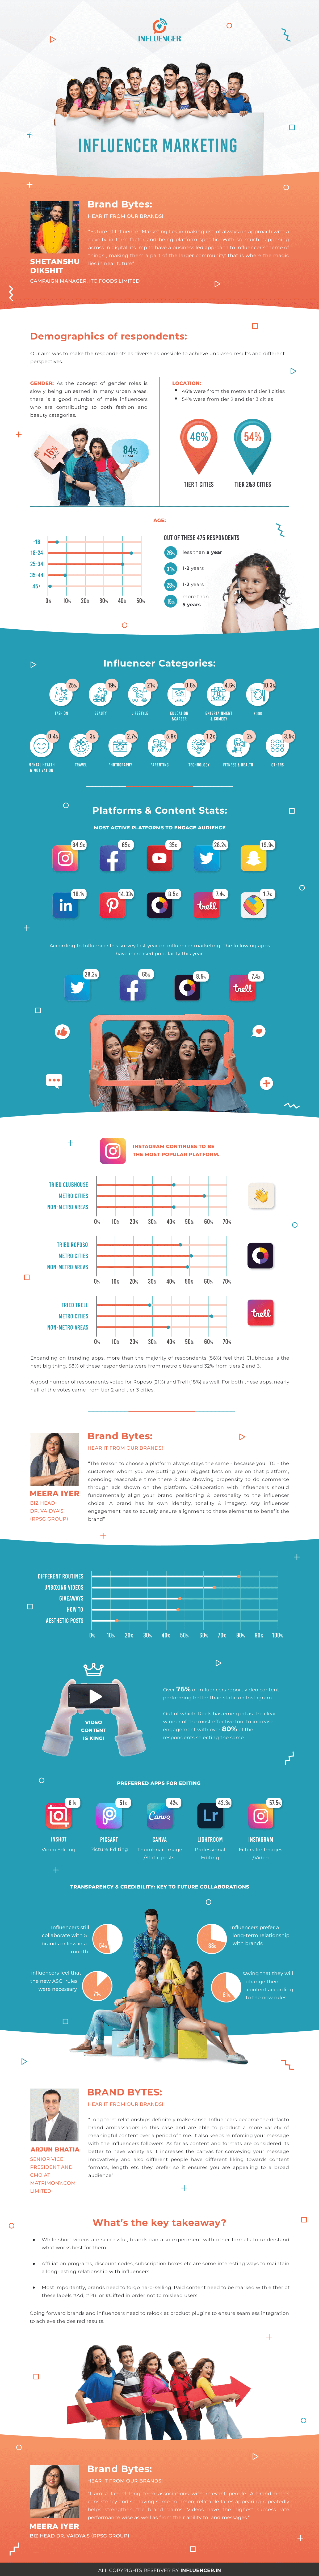 Influencer Marketing Report 2021 For India | Influencer.in